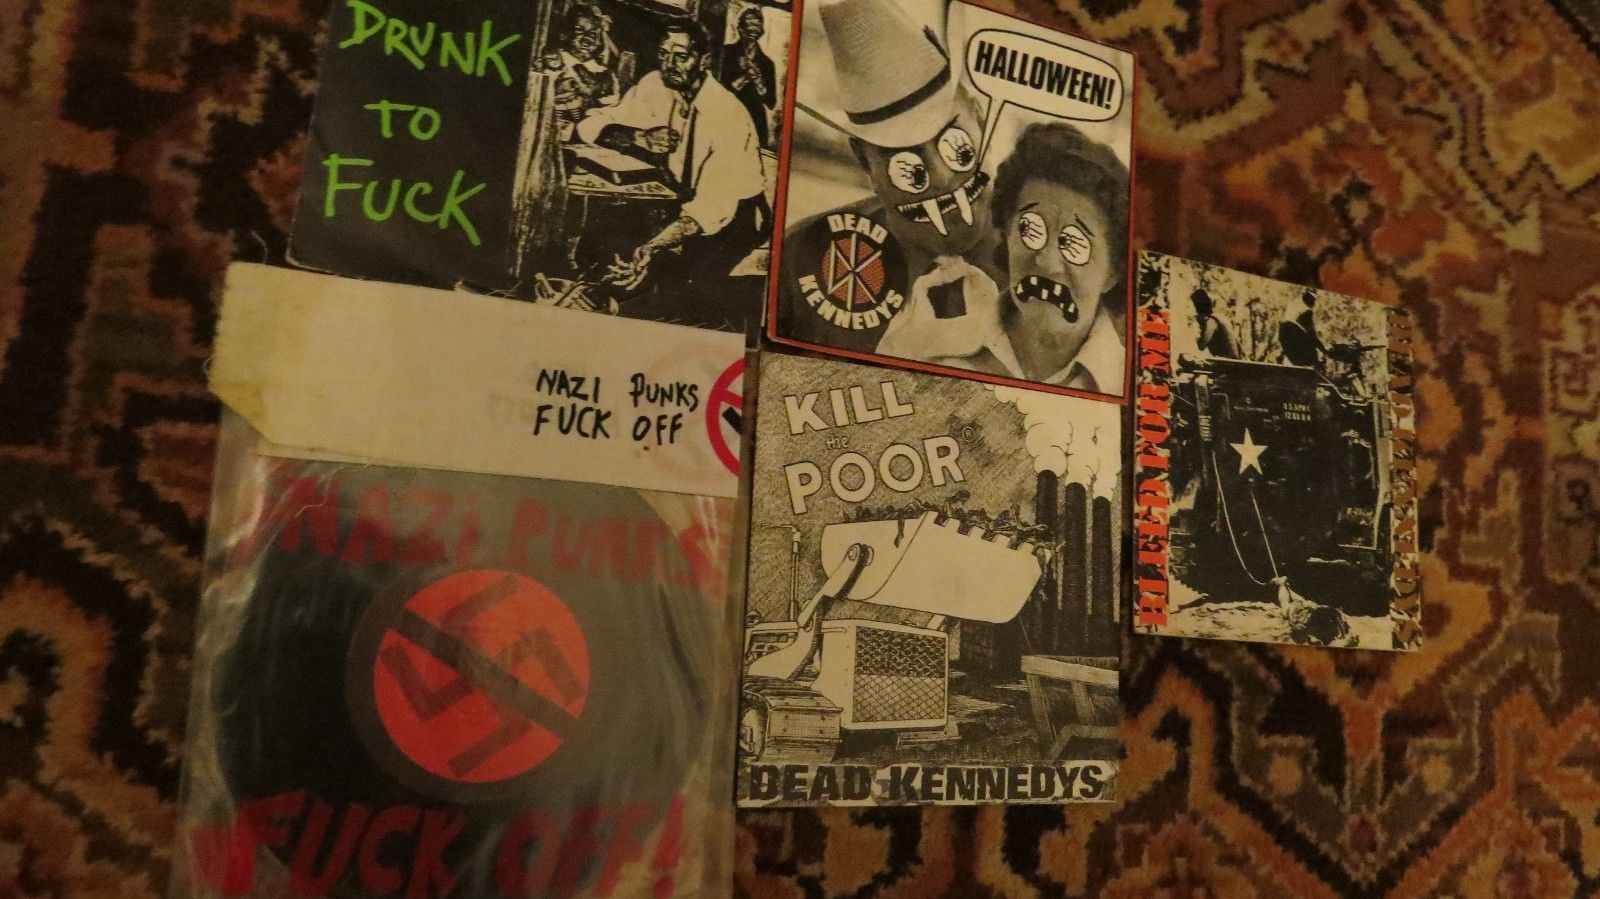 Dead Kennedys 7" set nazi punks bleed for me kill the poor halloween  too drunk